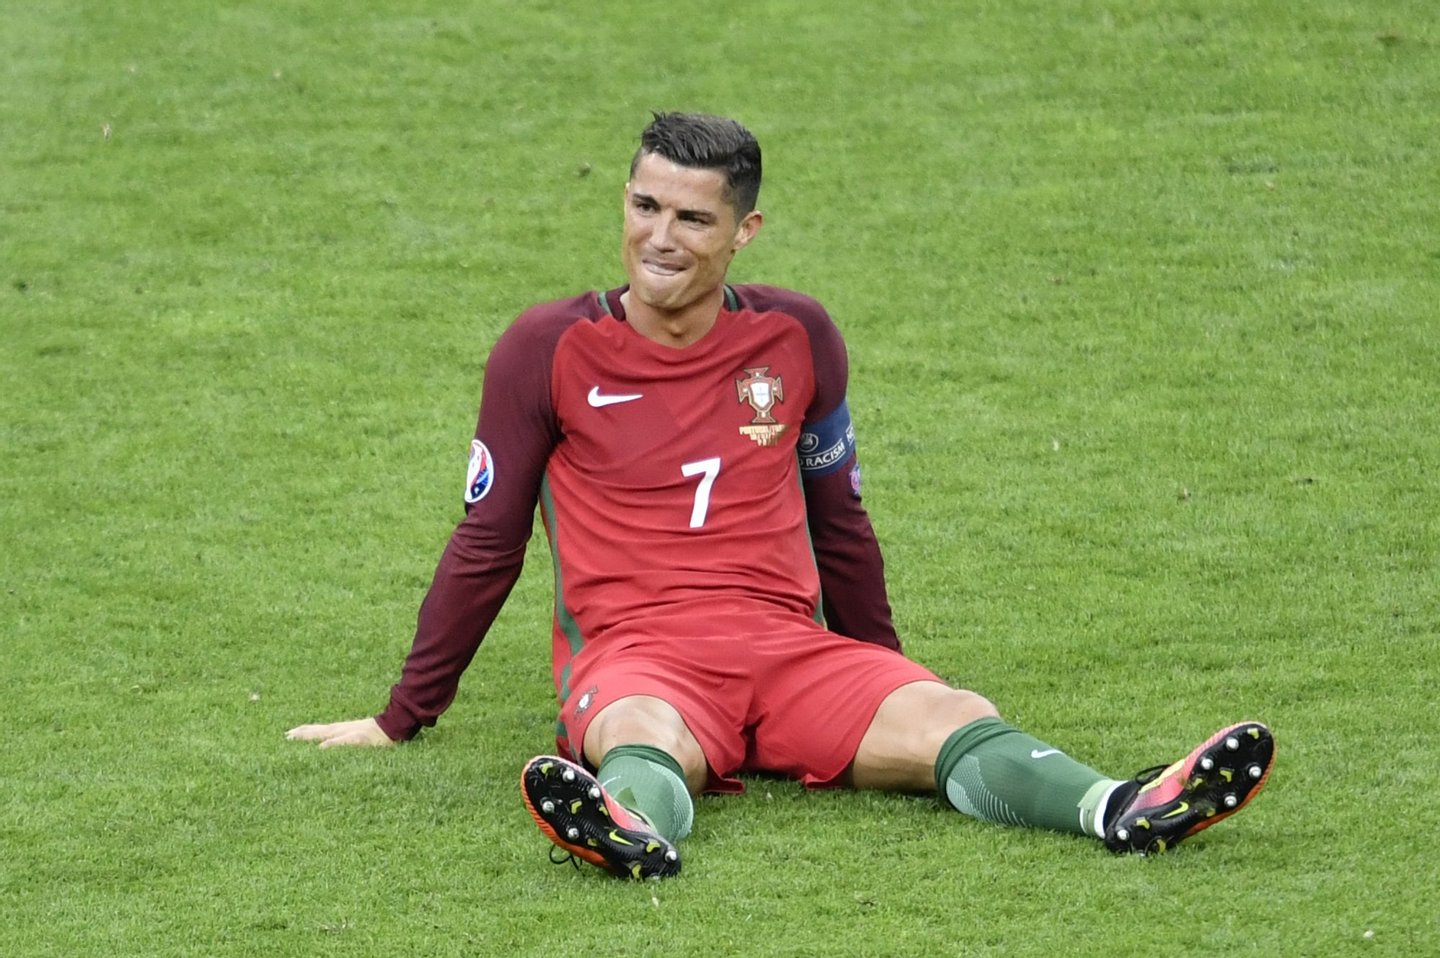 Portugal's forward Cristiano Ronaldo reacts after an injury following a clash with France's forward Dimitri Payet (not pictured) during the Euro 2016 final football match between Portugal and France at the Stade de France in Saint-Denis, north of Paris, on July 10, 2016. / AFP / PHILIPPE LOPEZ (Photo credit should read PHILIPPE LOPEZ/AFP/Getty Images)